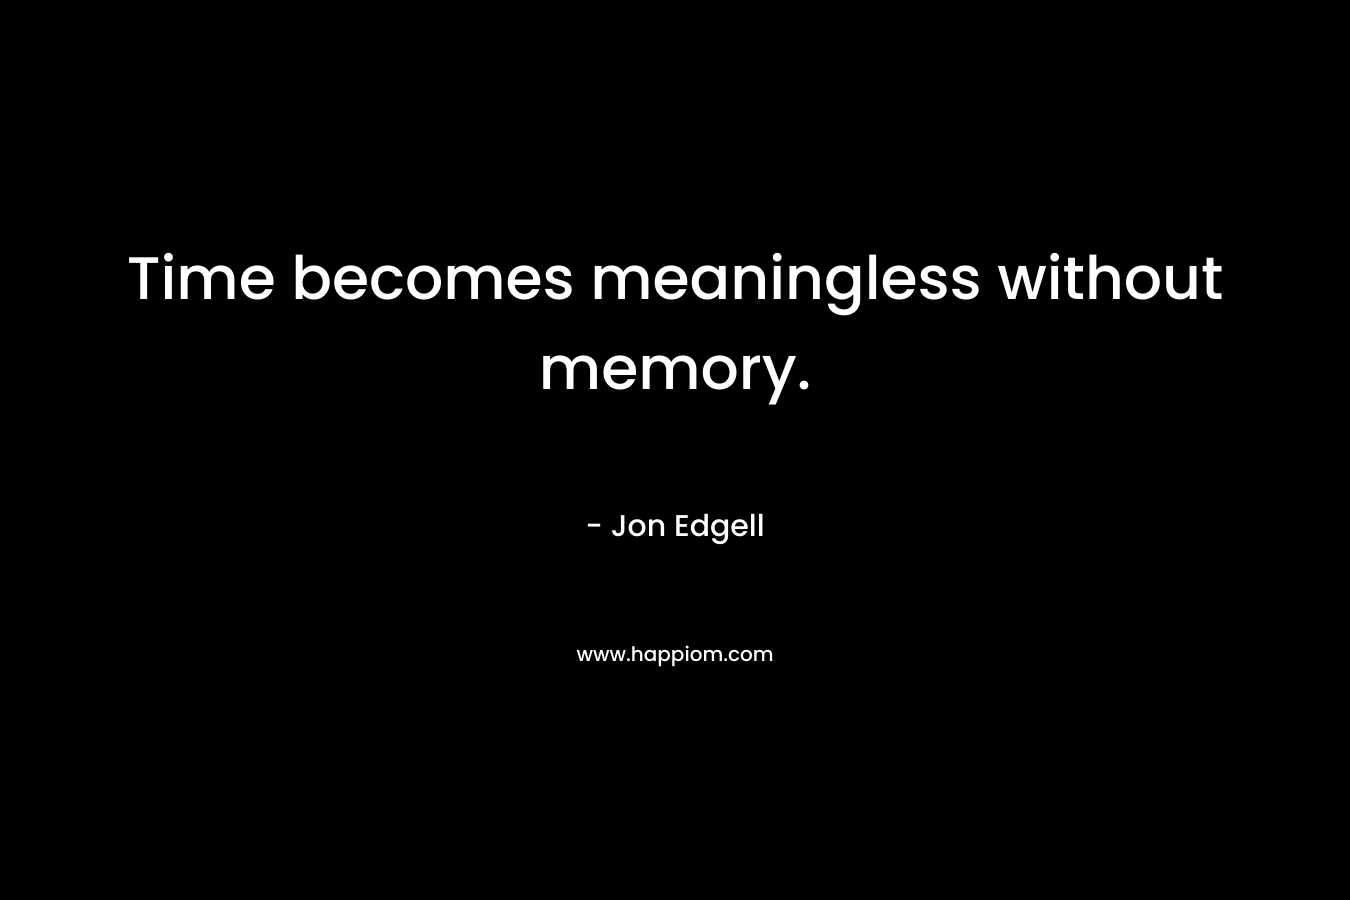 Time becomes meaningless without memory. – Jon Edgell